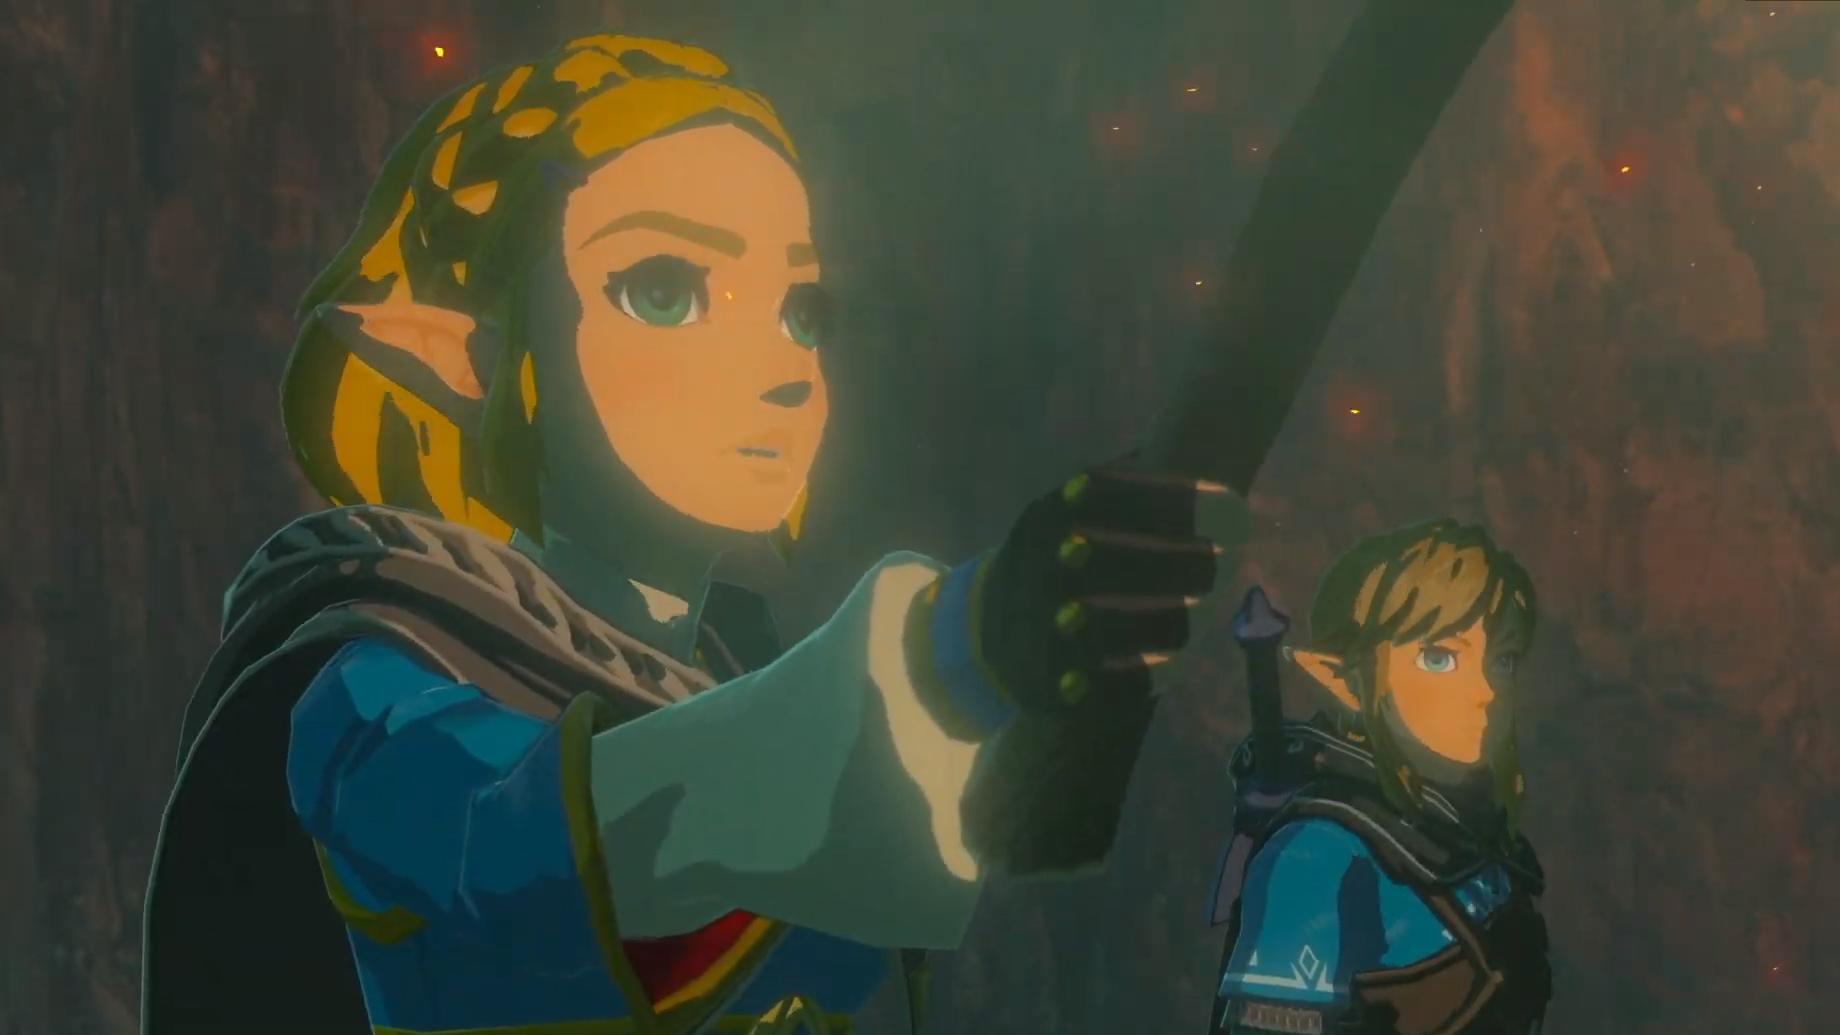 Botw link getting fucked by boy The Legend Of Zelda Breath Of The Wild 2 For Nintendo Switch Release Date Price Rumors And Everything We Know So Far About The Sequel Imore